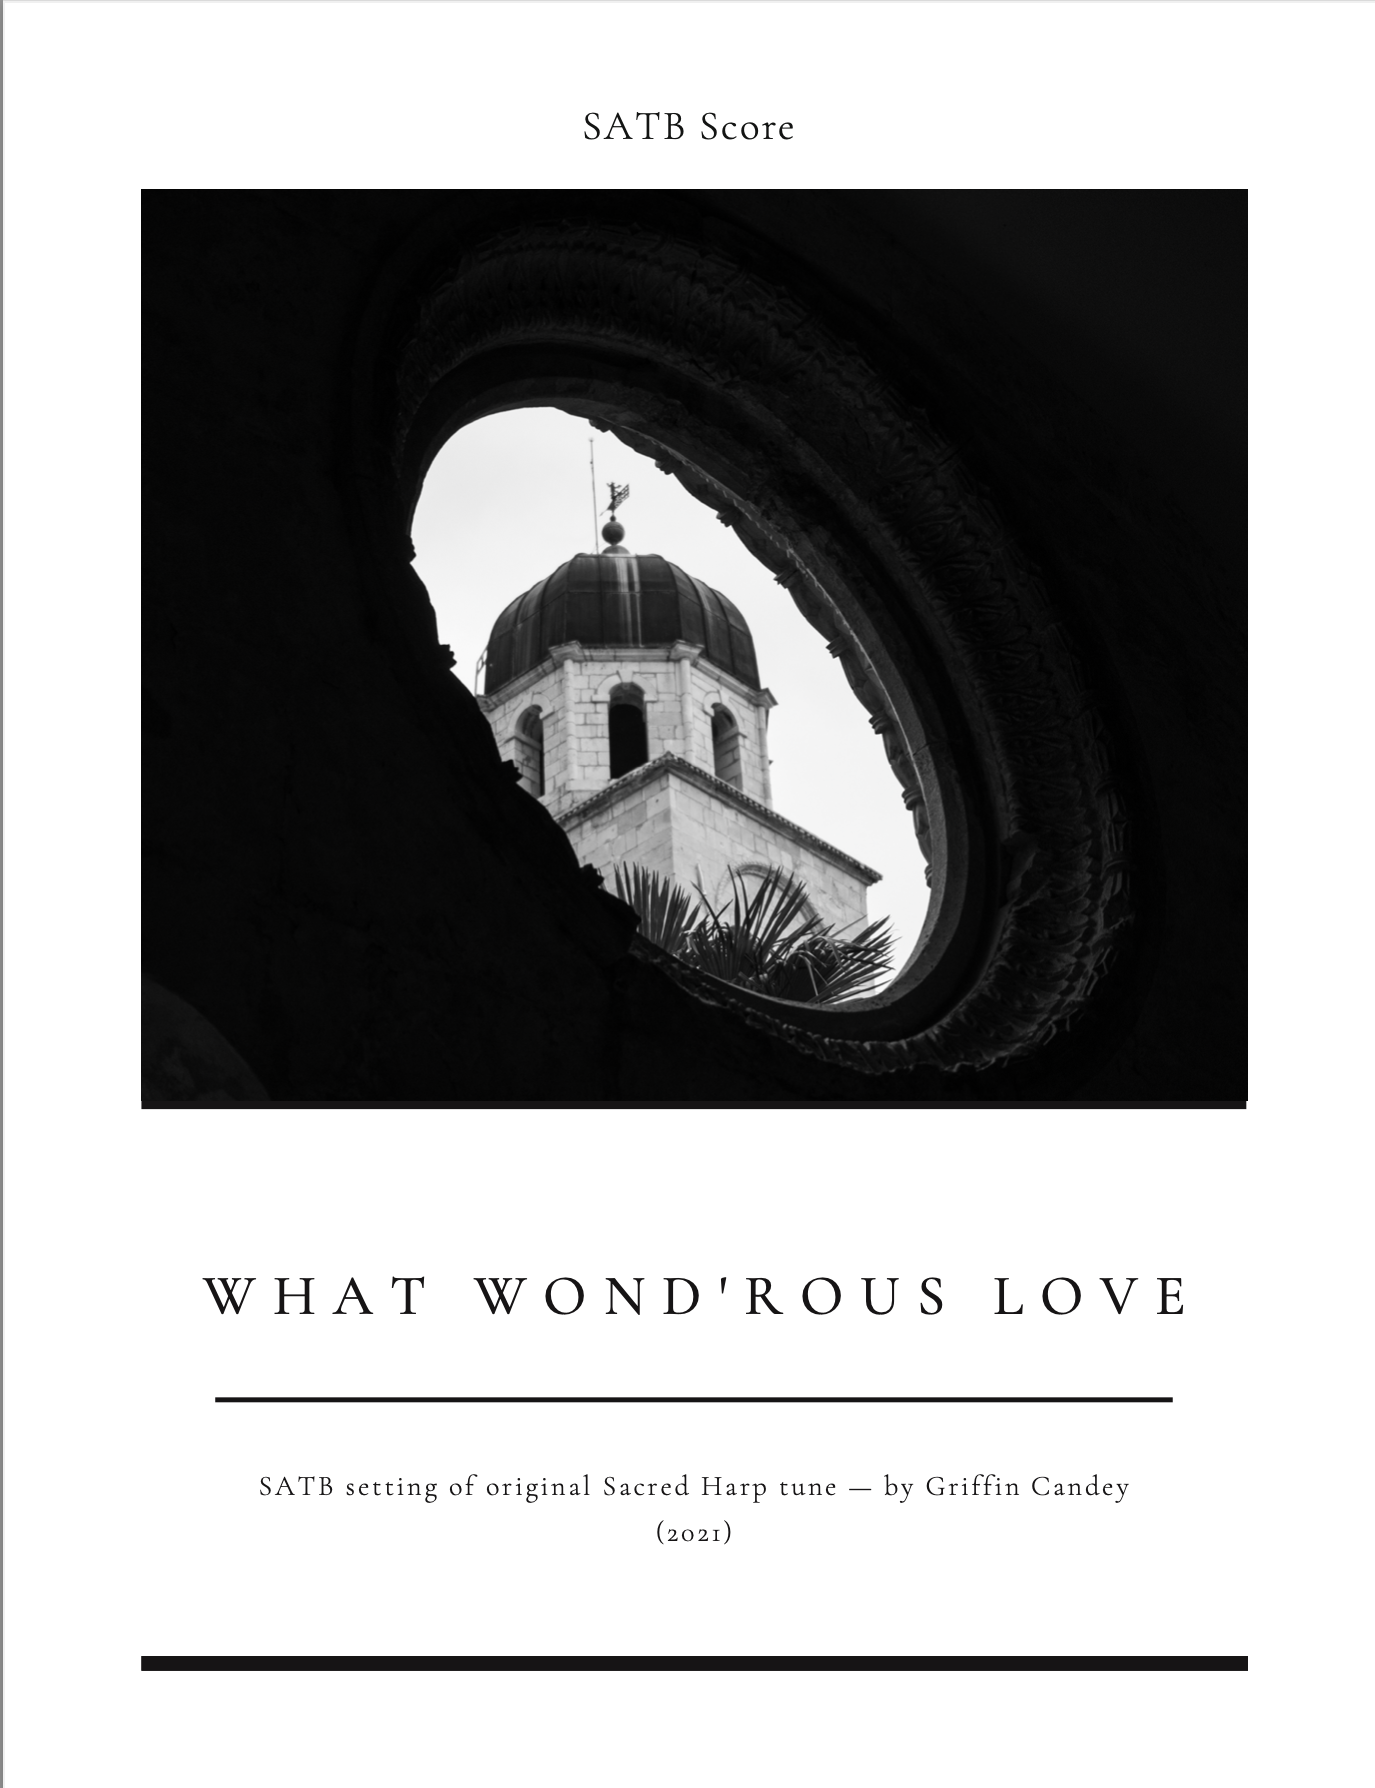 What Wond'rous Love by arr. Griffin Candey